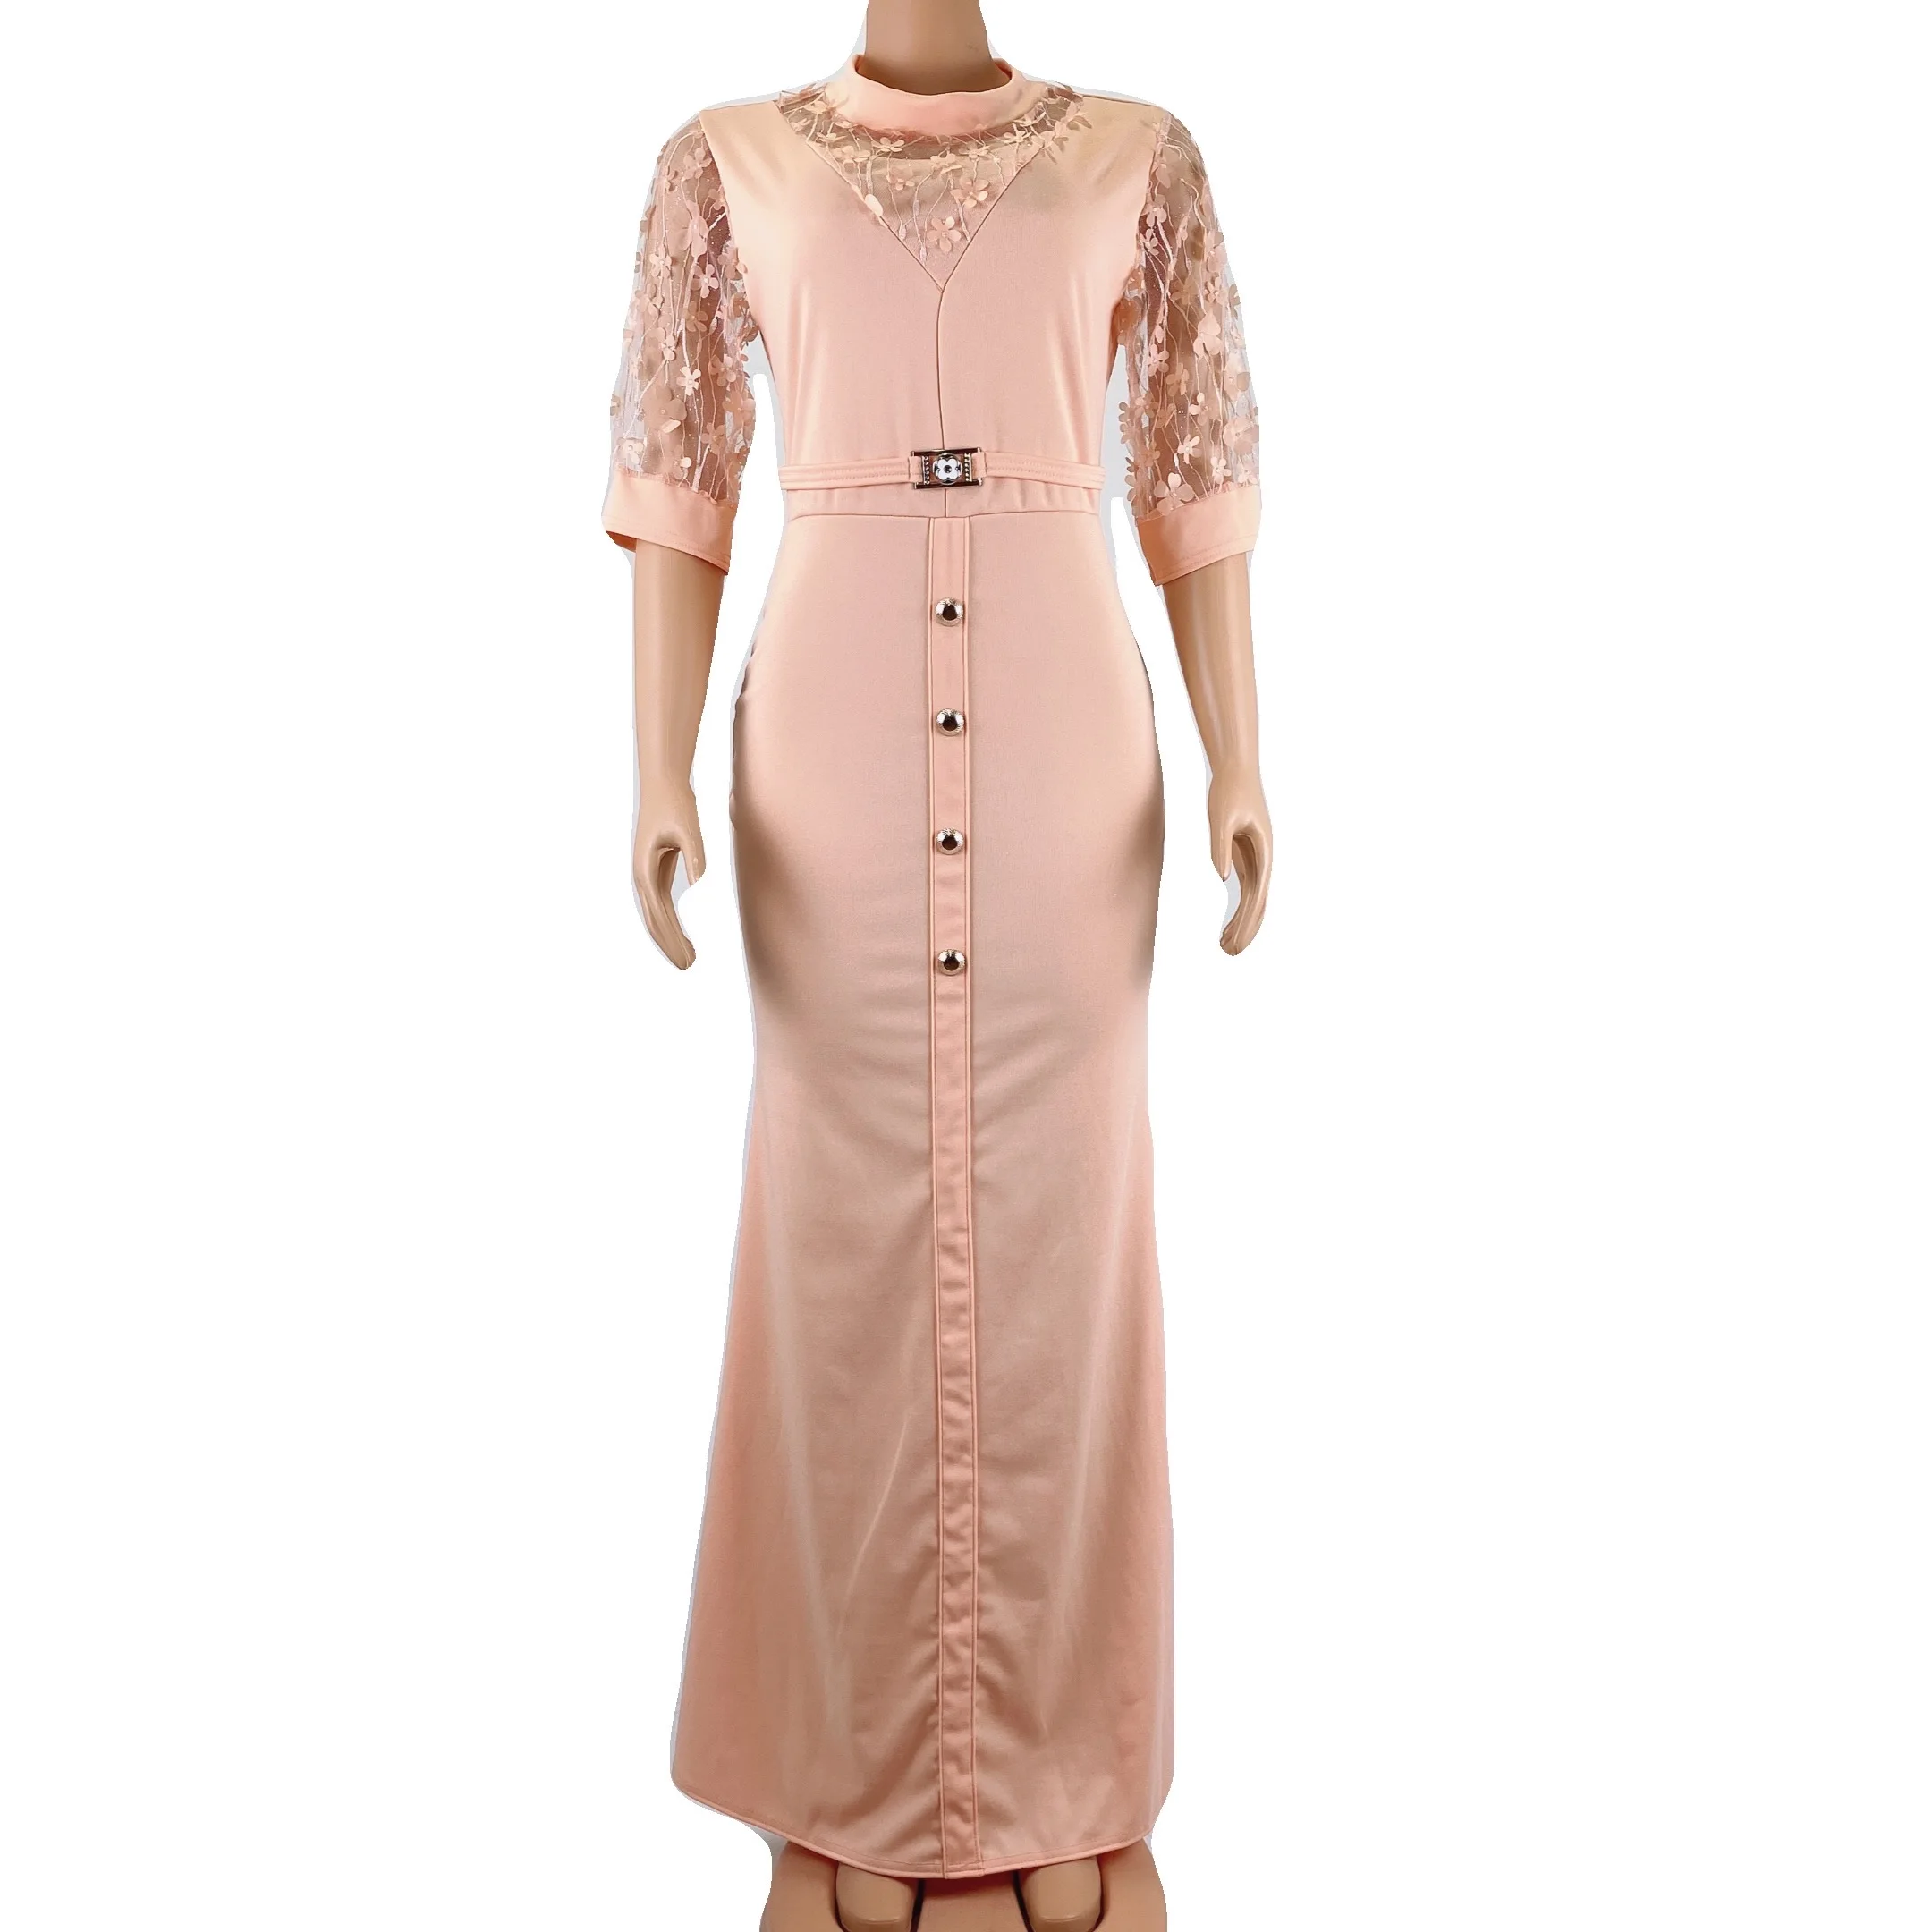 

casual Mesh Patch mesh sleeve lace flower Waistbelt maxi african ladies long dresses for plus size women, Shown